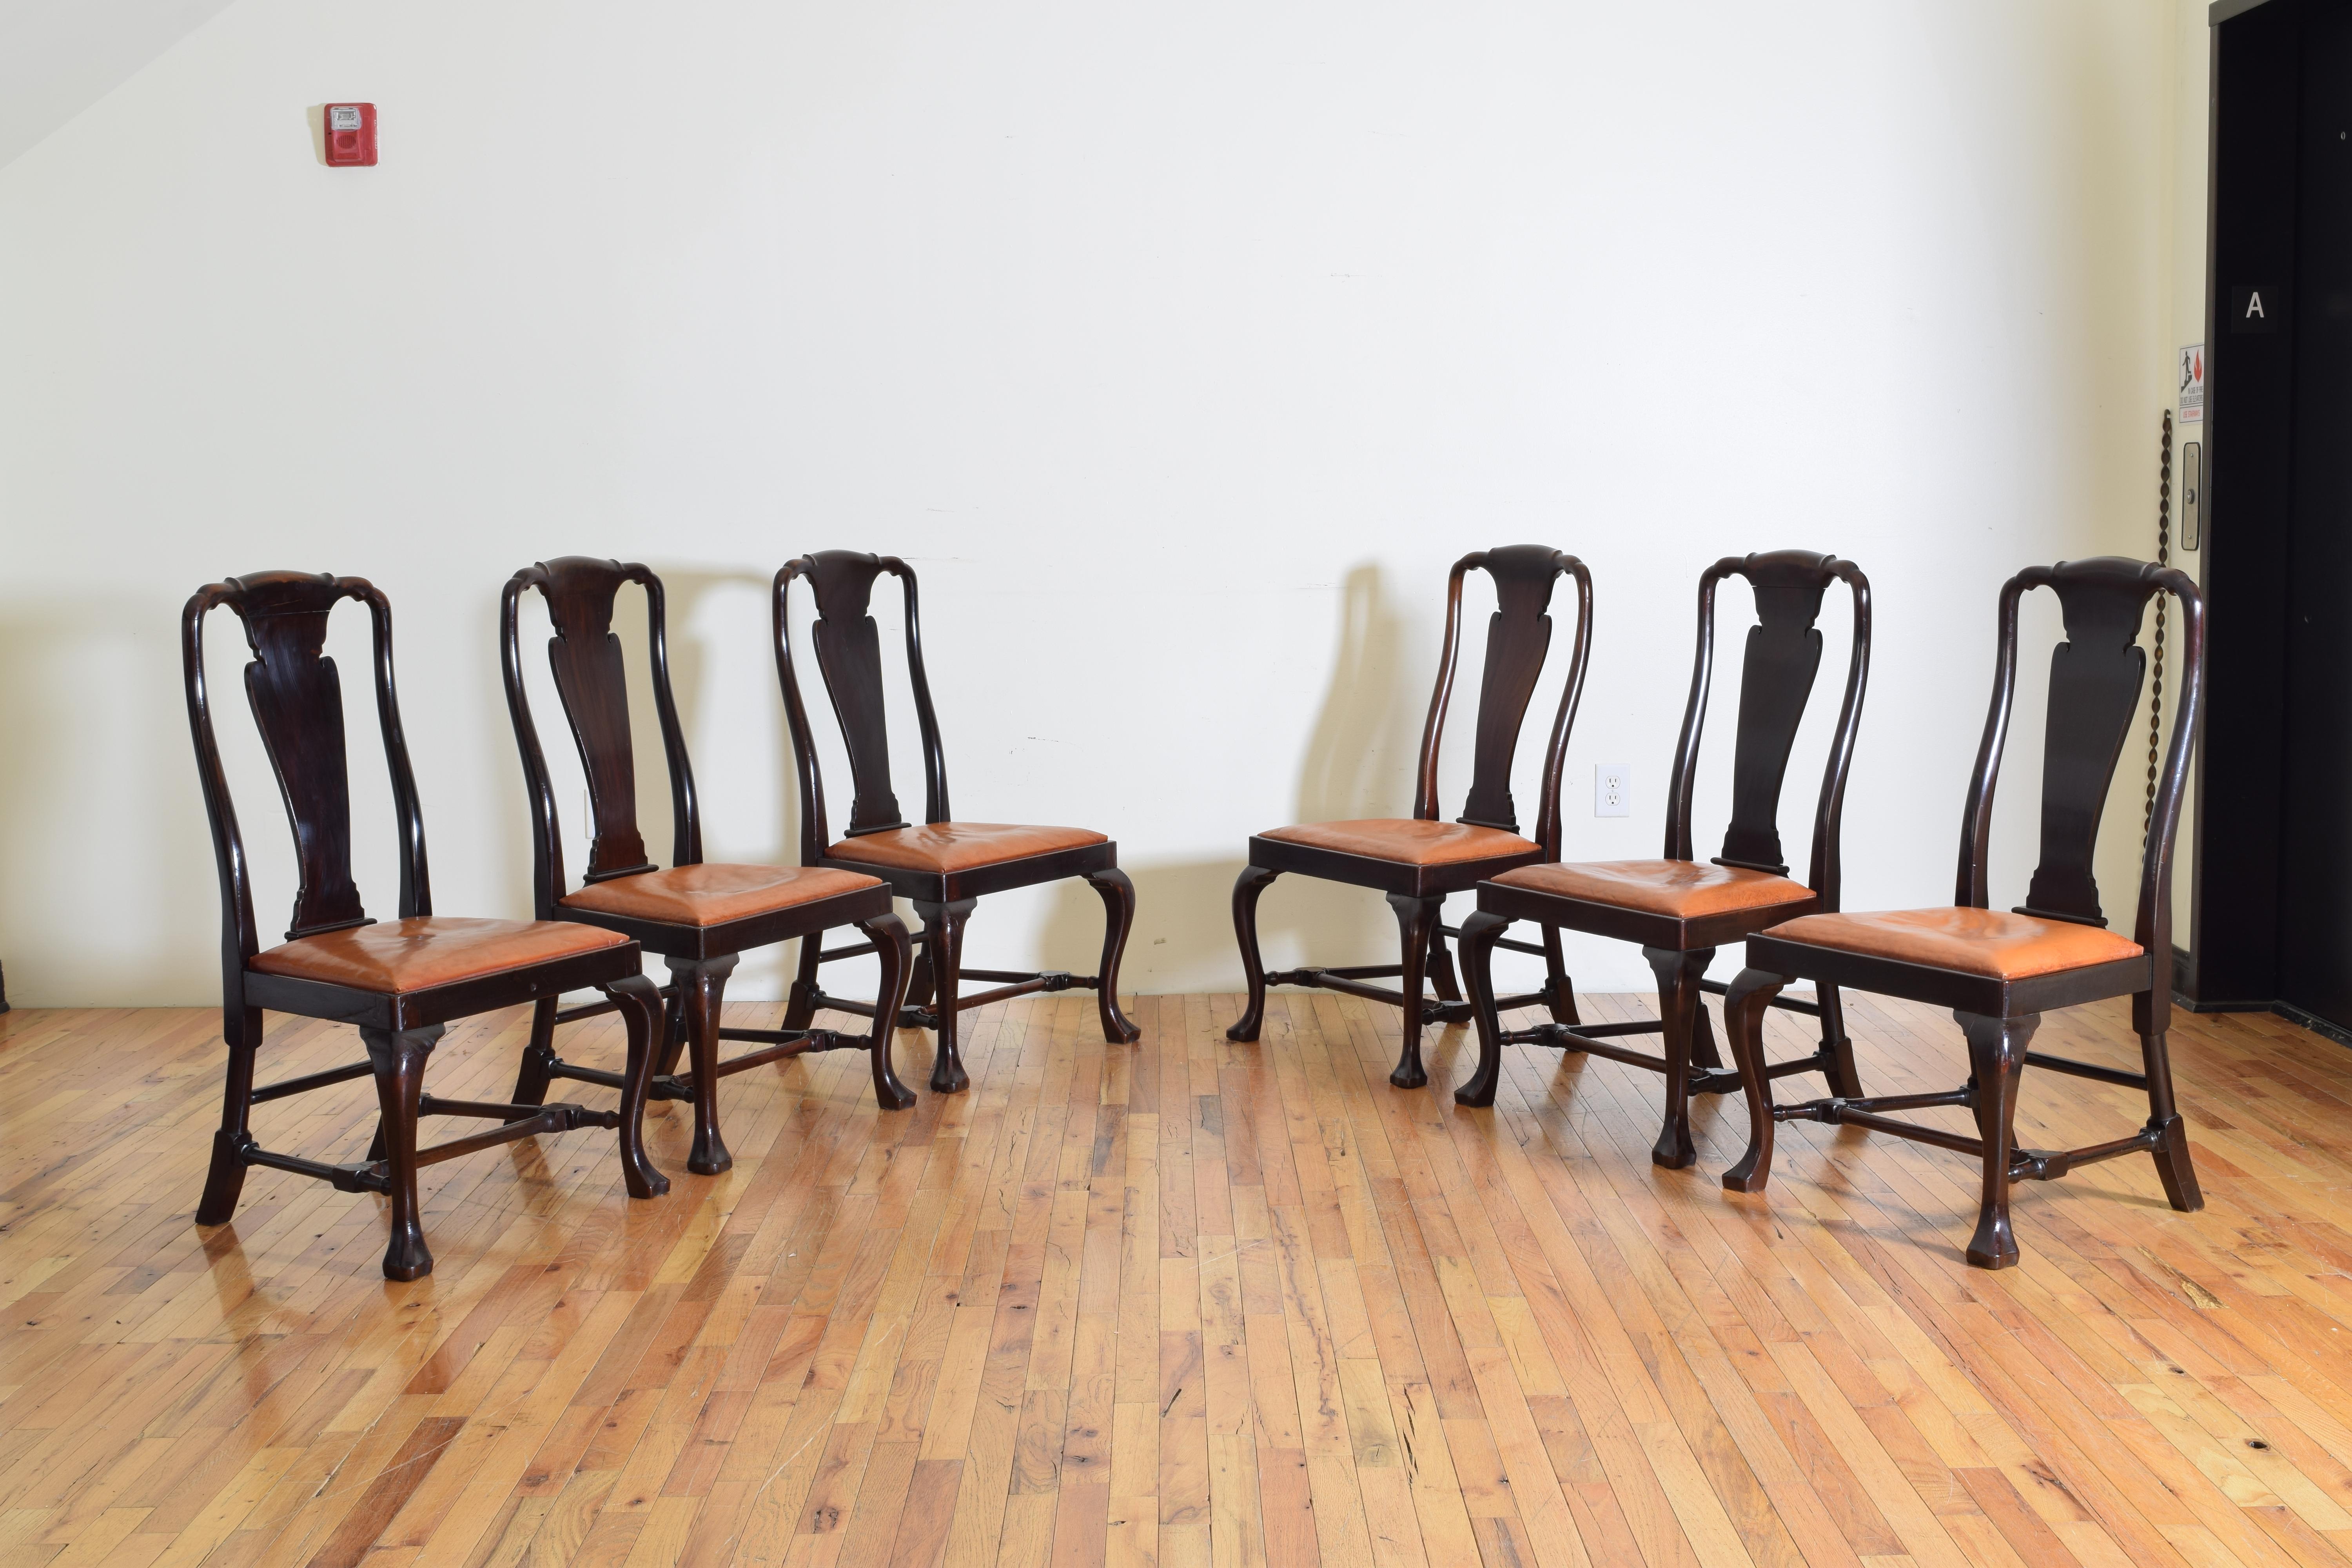 20th Century Set of 6 English Mahogany and Leather Upholstered Dining Chairs, circa 1900